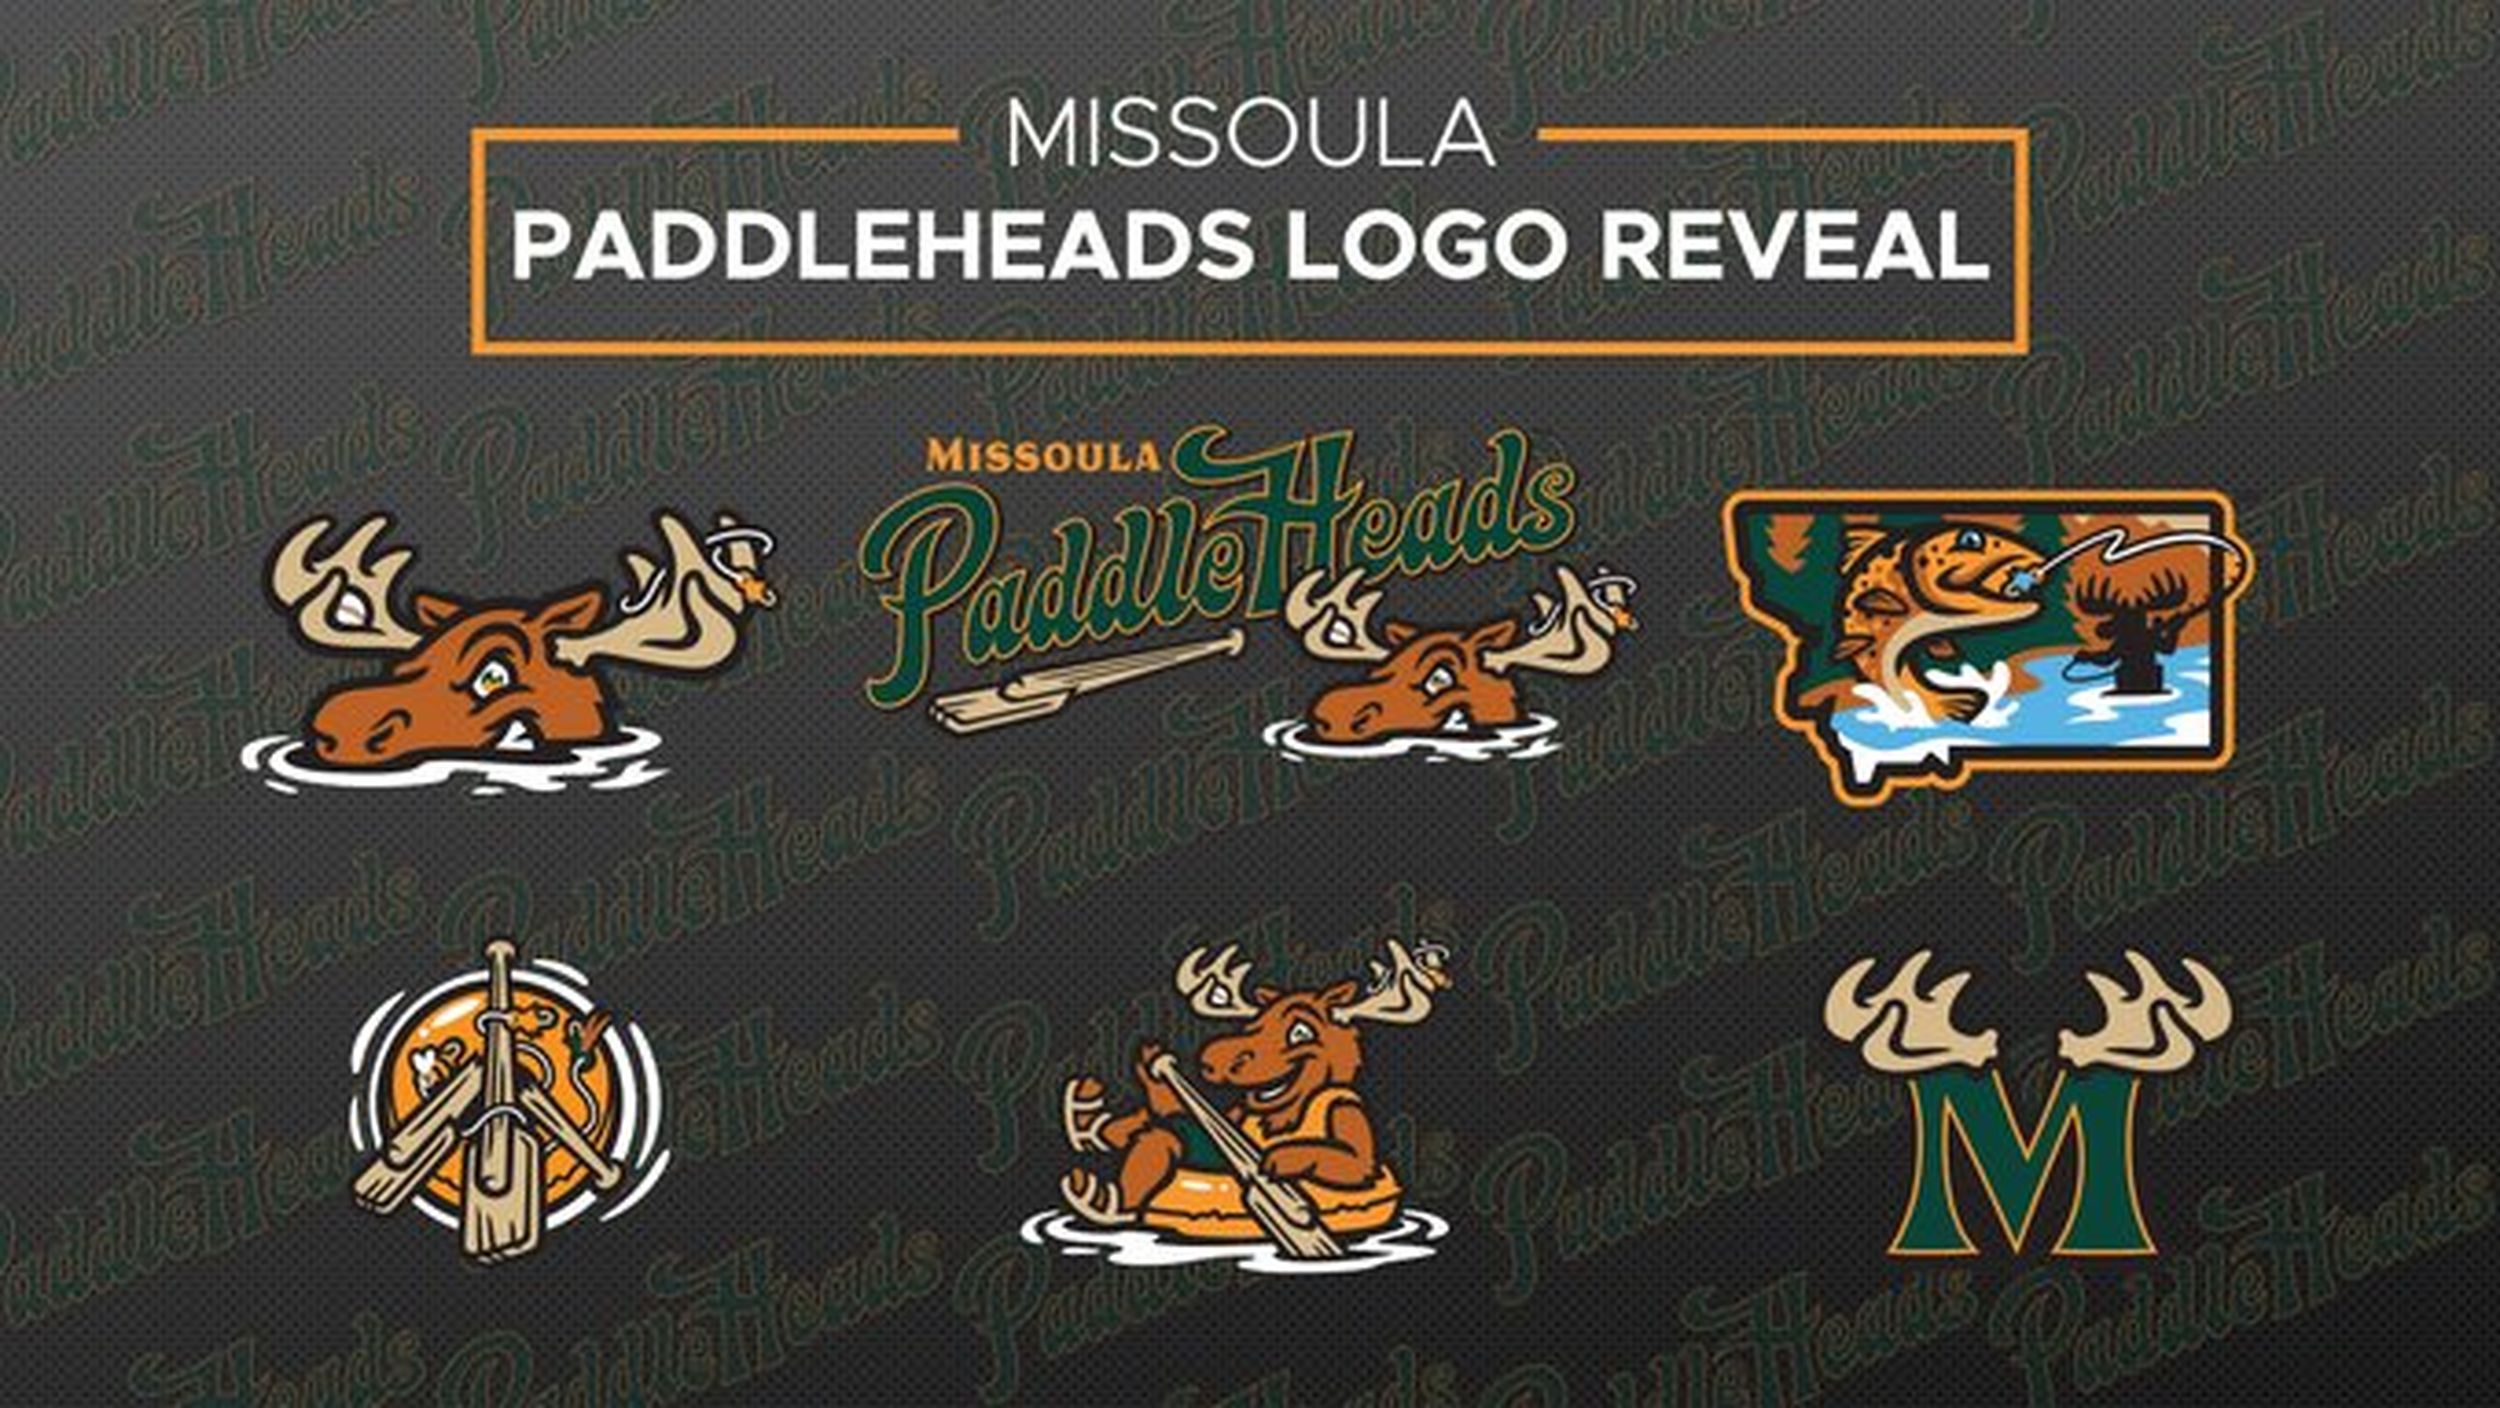 Meet the Missoula PaddleHeads; New Name and Logos Unveiled to Replace